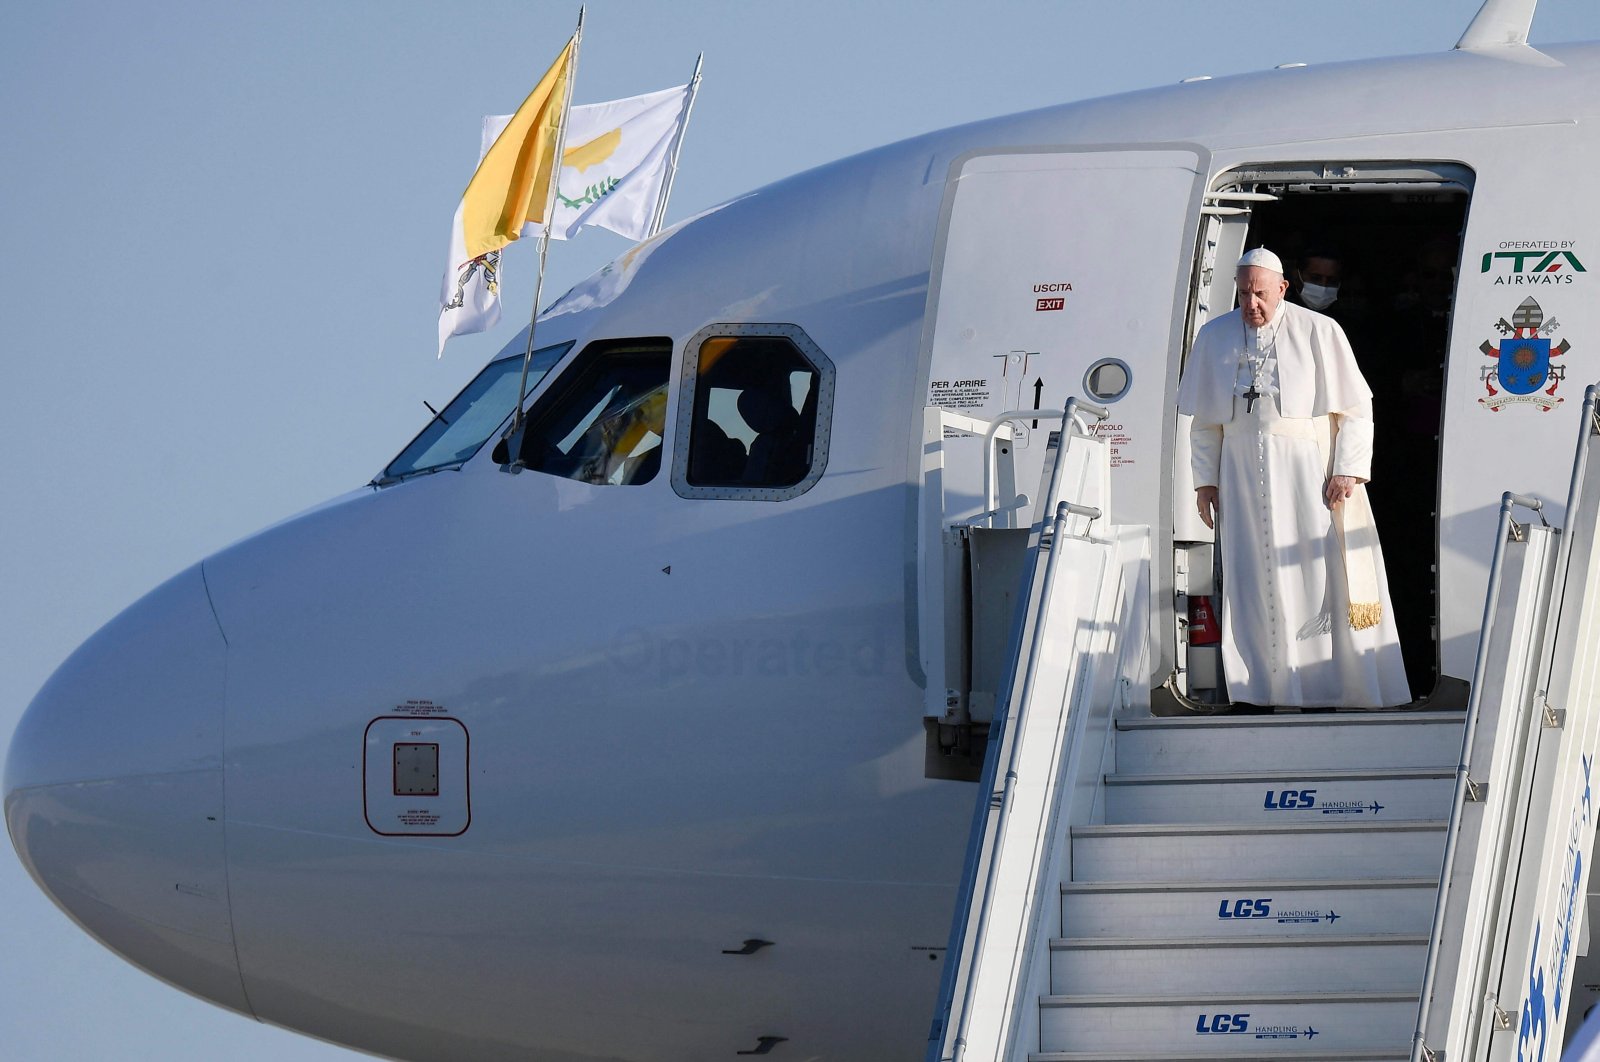 Pope Francis disembarks from the plane upon his arrival in the Greek Cypriot administration controlled city of Larnaca on the island of Cyprus, Dec. 2, 2021 (The Vatican Media handout photo via AFP)